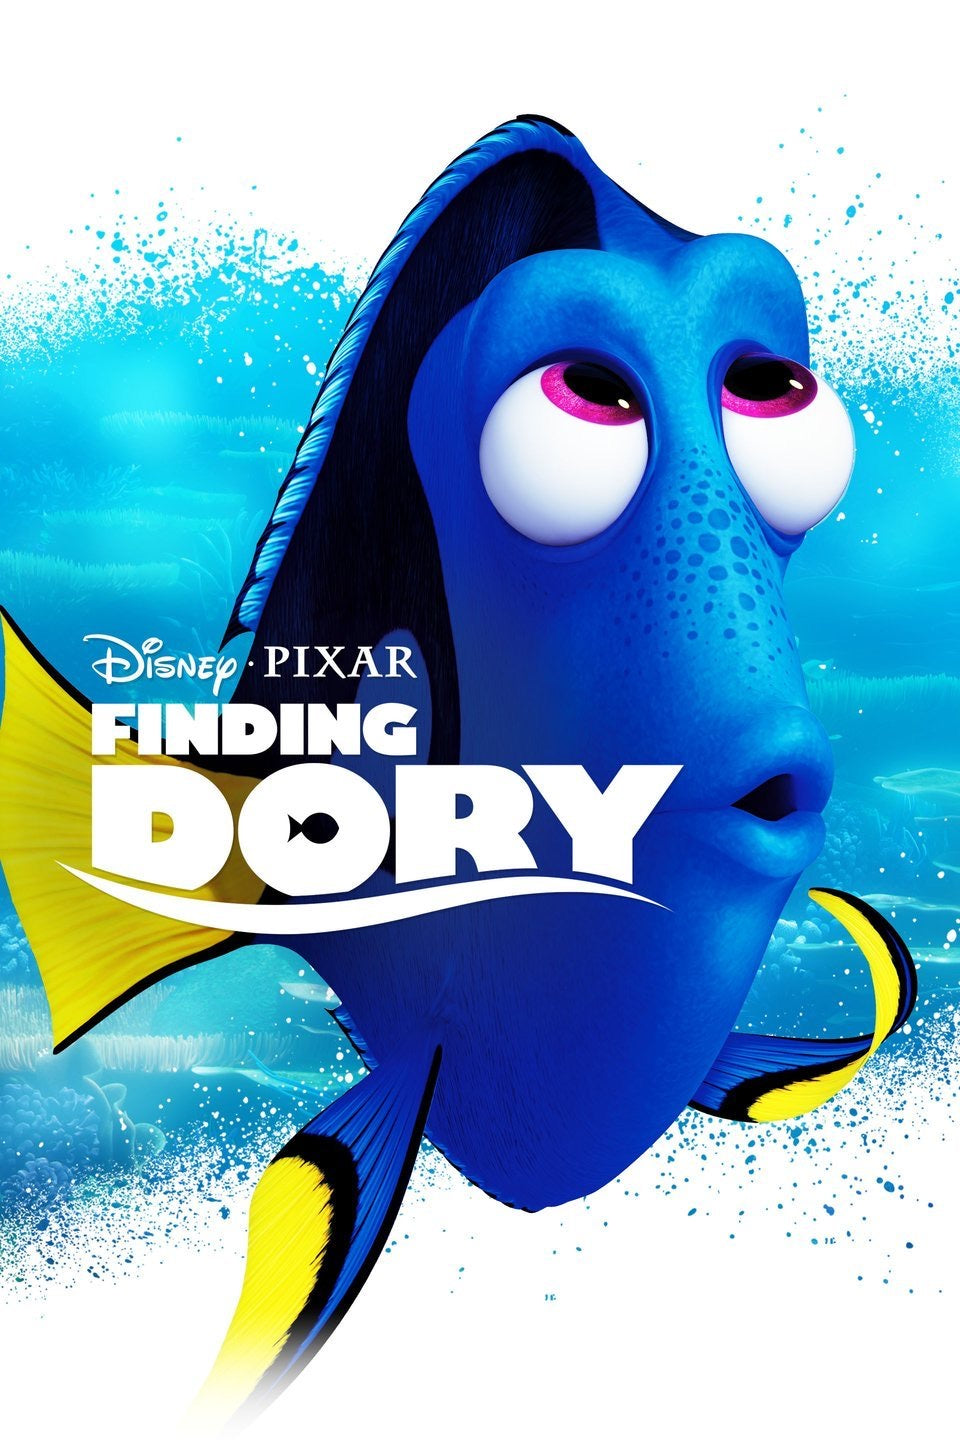 Finding Dory (2016) Vudu or Movies Anywhere HD redemption only